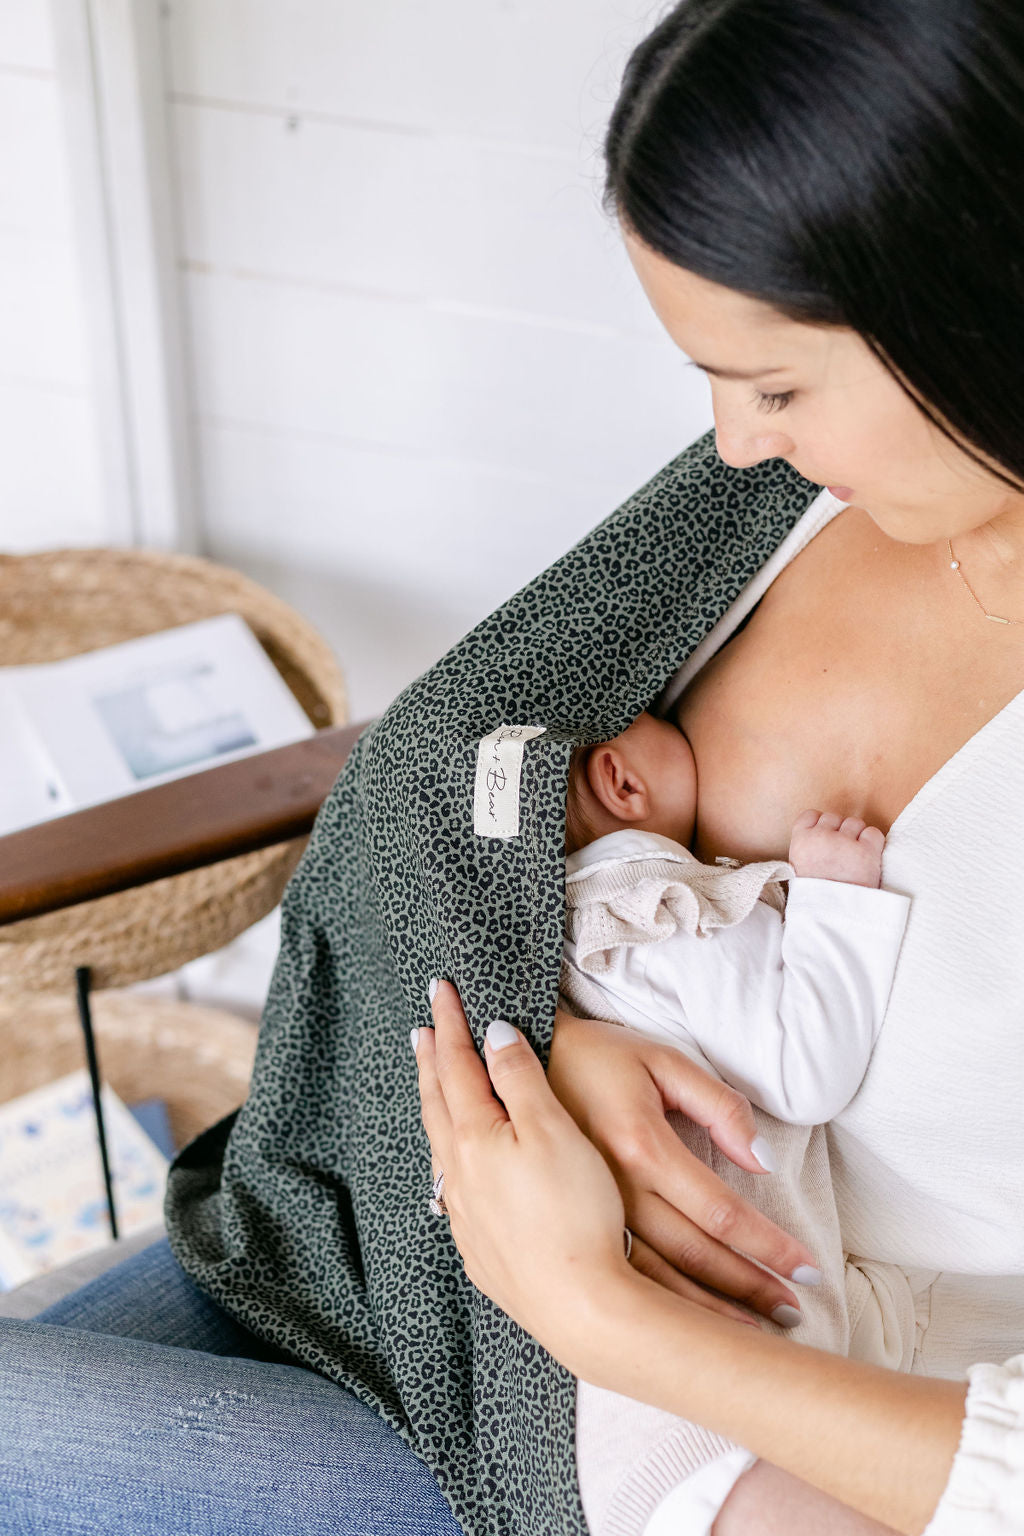 My Thoughts On Breastfeeding For The Second Time - Bon + Bear Founder